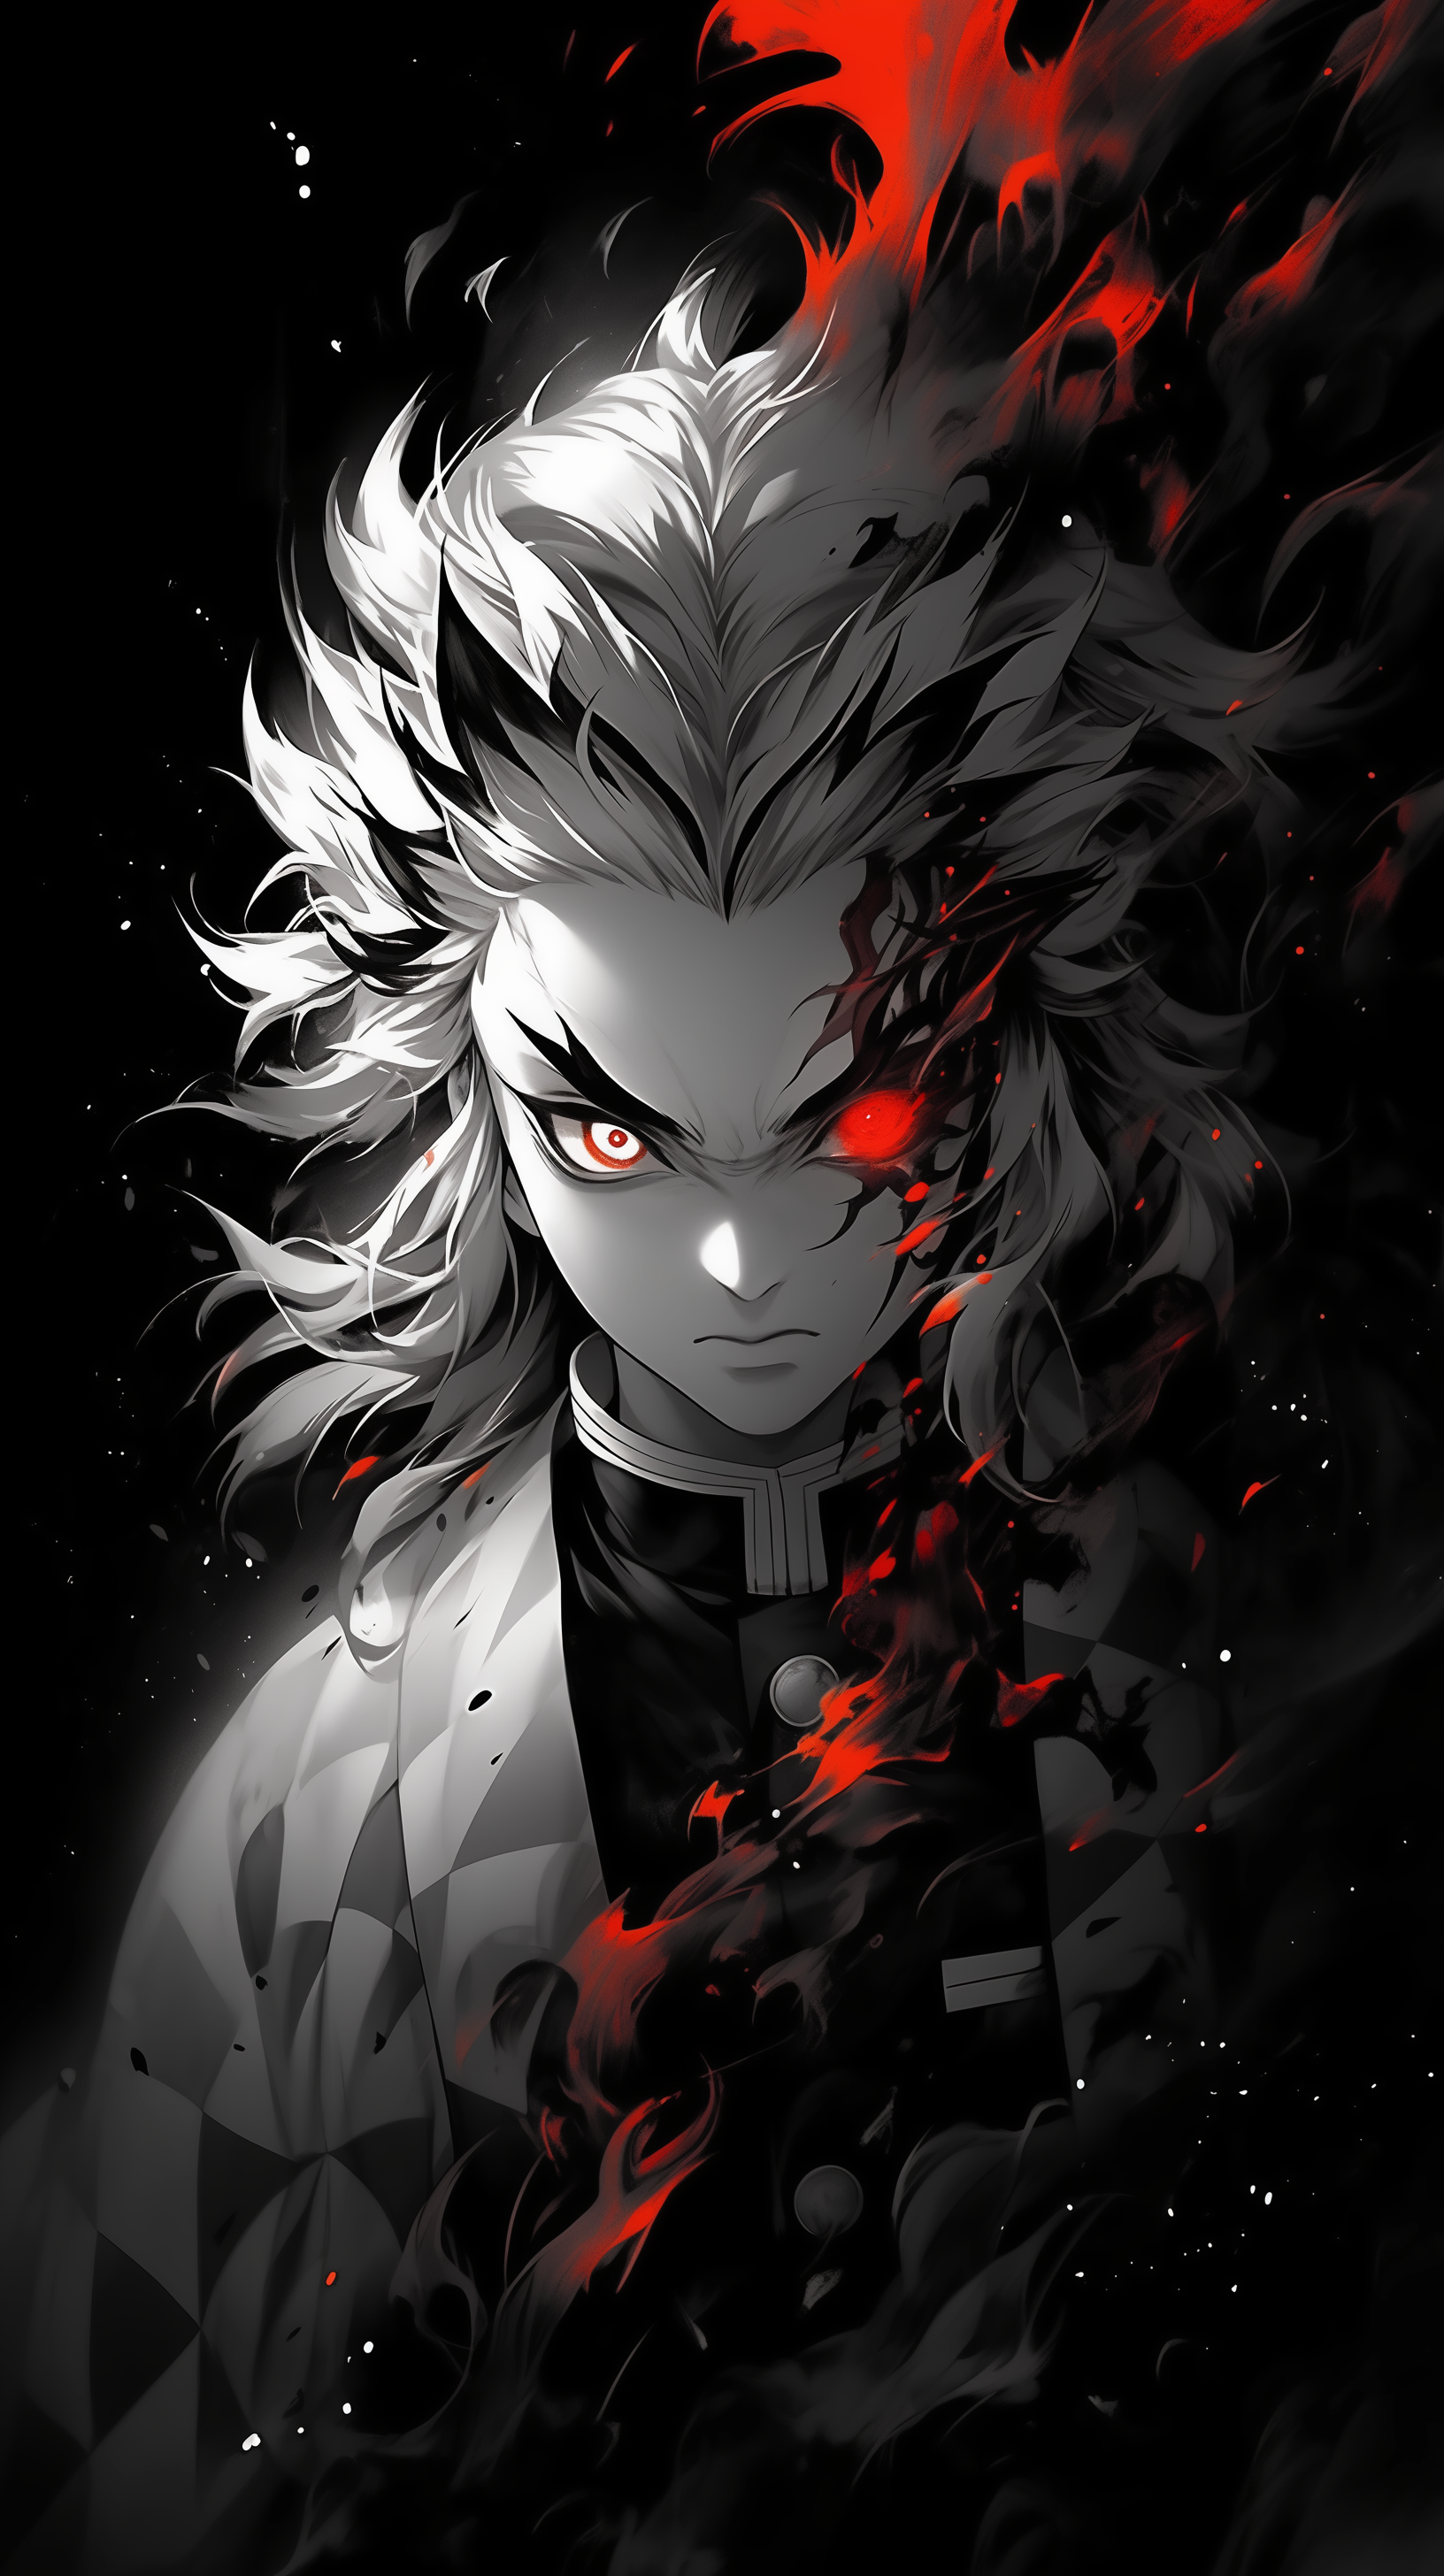 Demon Slayer: Kimetsu no Yaiba Kyojuro Rengoku themed phone wallpaper featuring a fiery and intense character illustration with dynamic red and black contrasts.